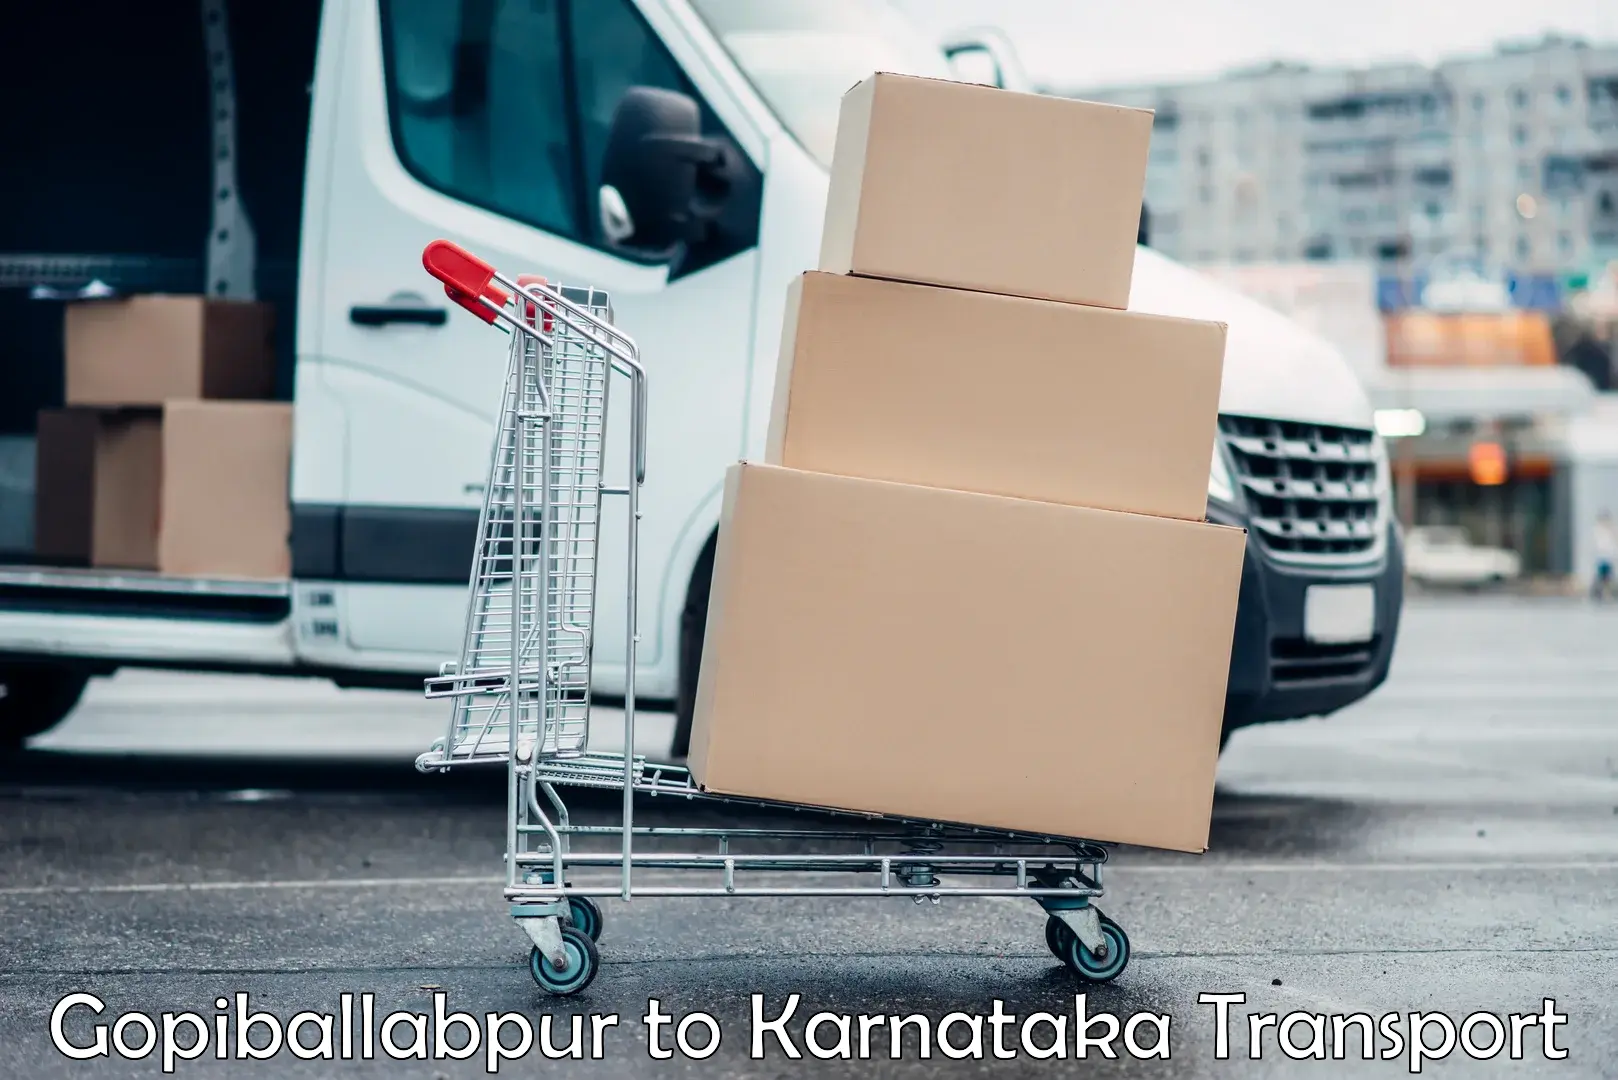 Commercial transport service Gopiballabpur to Bellary